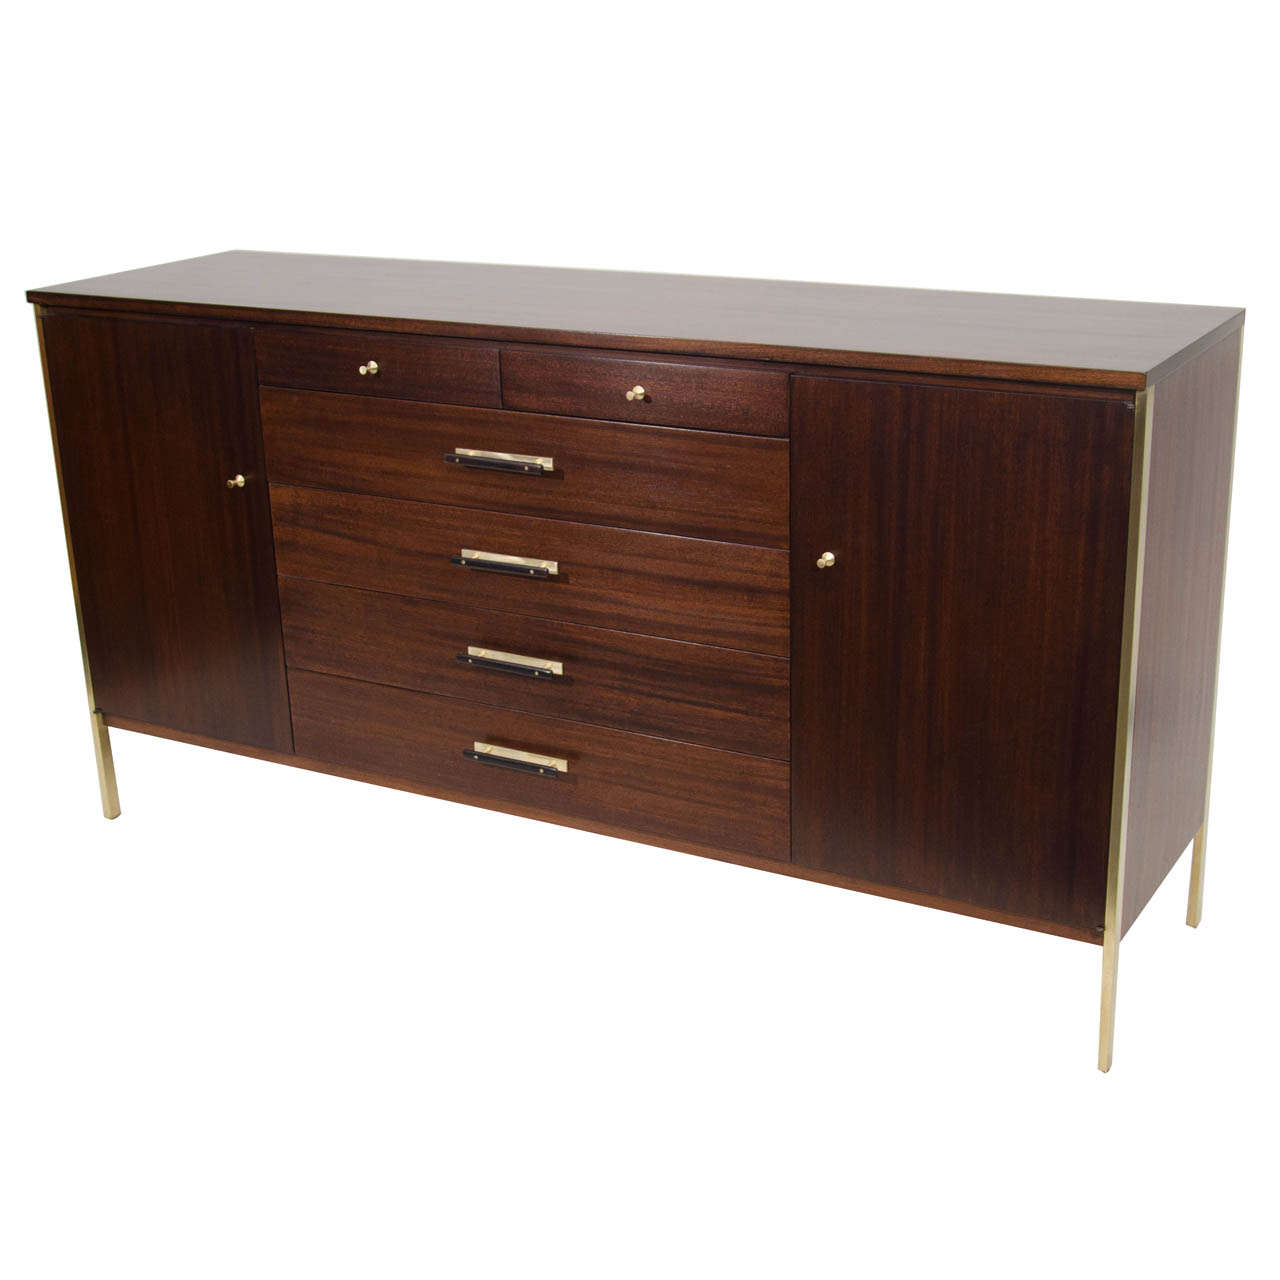 Paul McCobb Dresser Credenza for the Calvin Group Collection